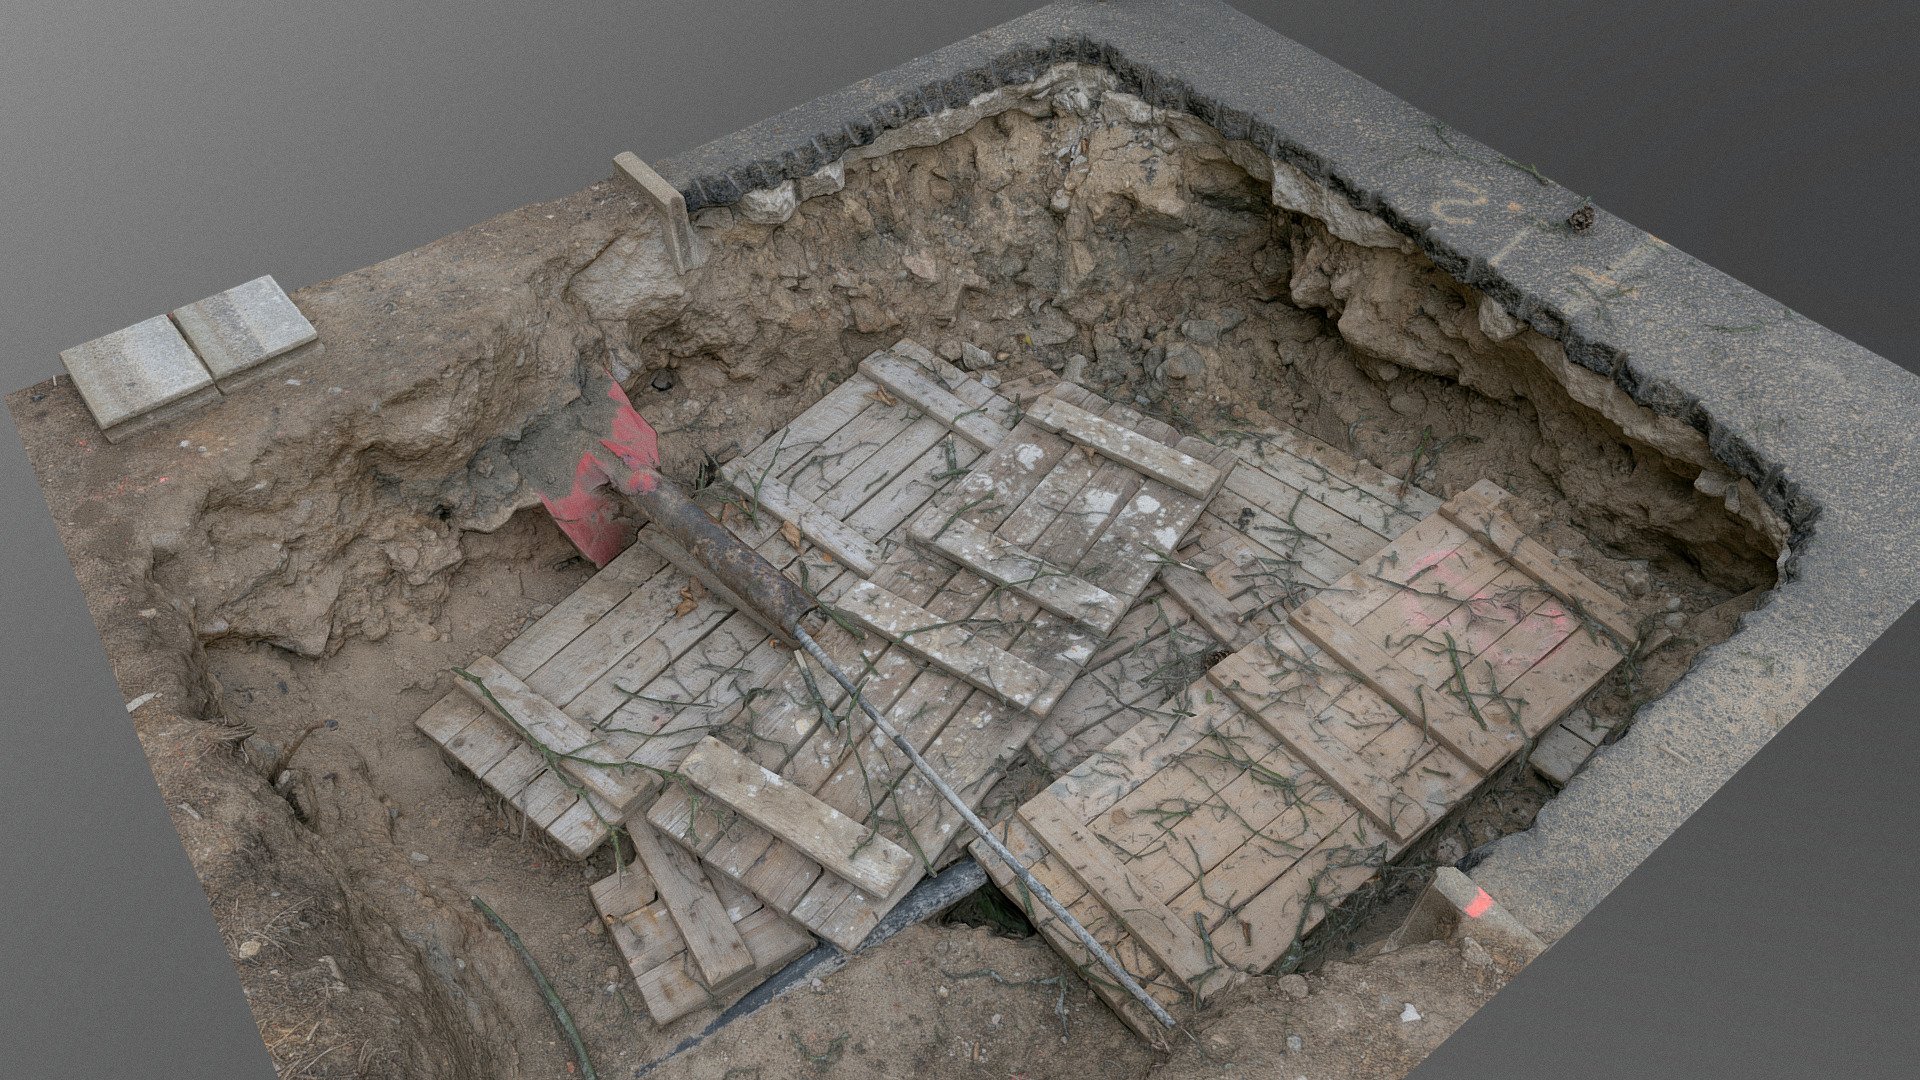 Construction dig site excavation, water pipe pipeline street reconstruction ground earth work inspection covered by wooden boards plates and some broken tree branches after strong wind weather

Raw photogrammetry scan (180x36MP), 4x8K texture - Covered dig site - Buy Royalty Free 3D model by matousekfoto 3d model